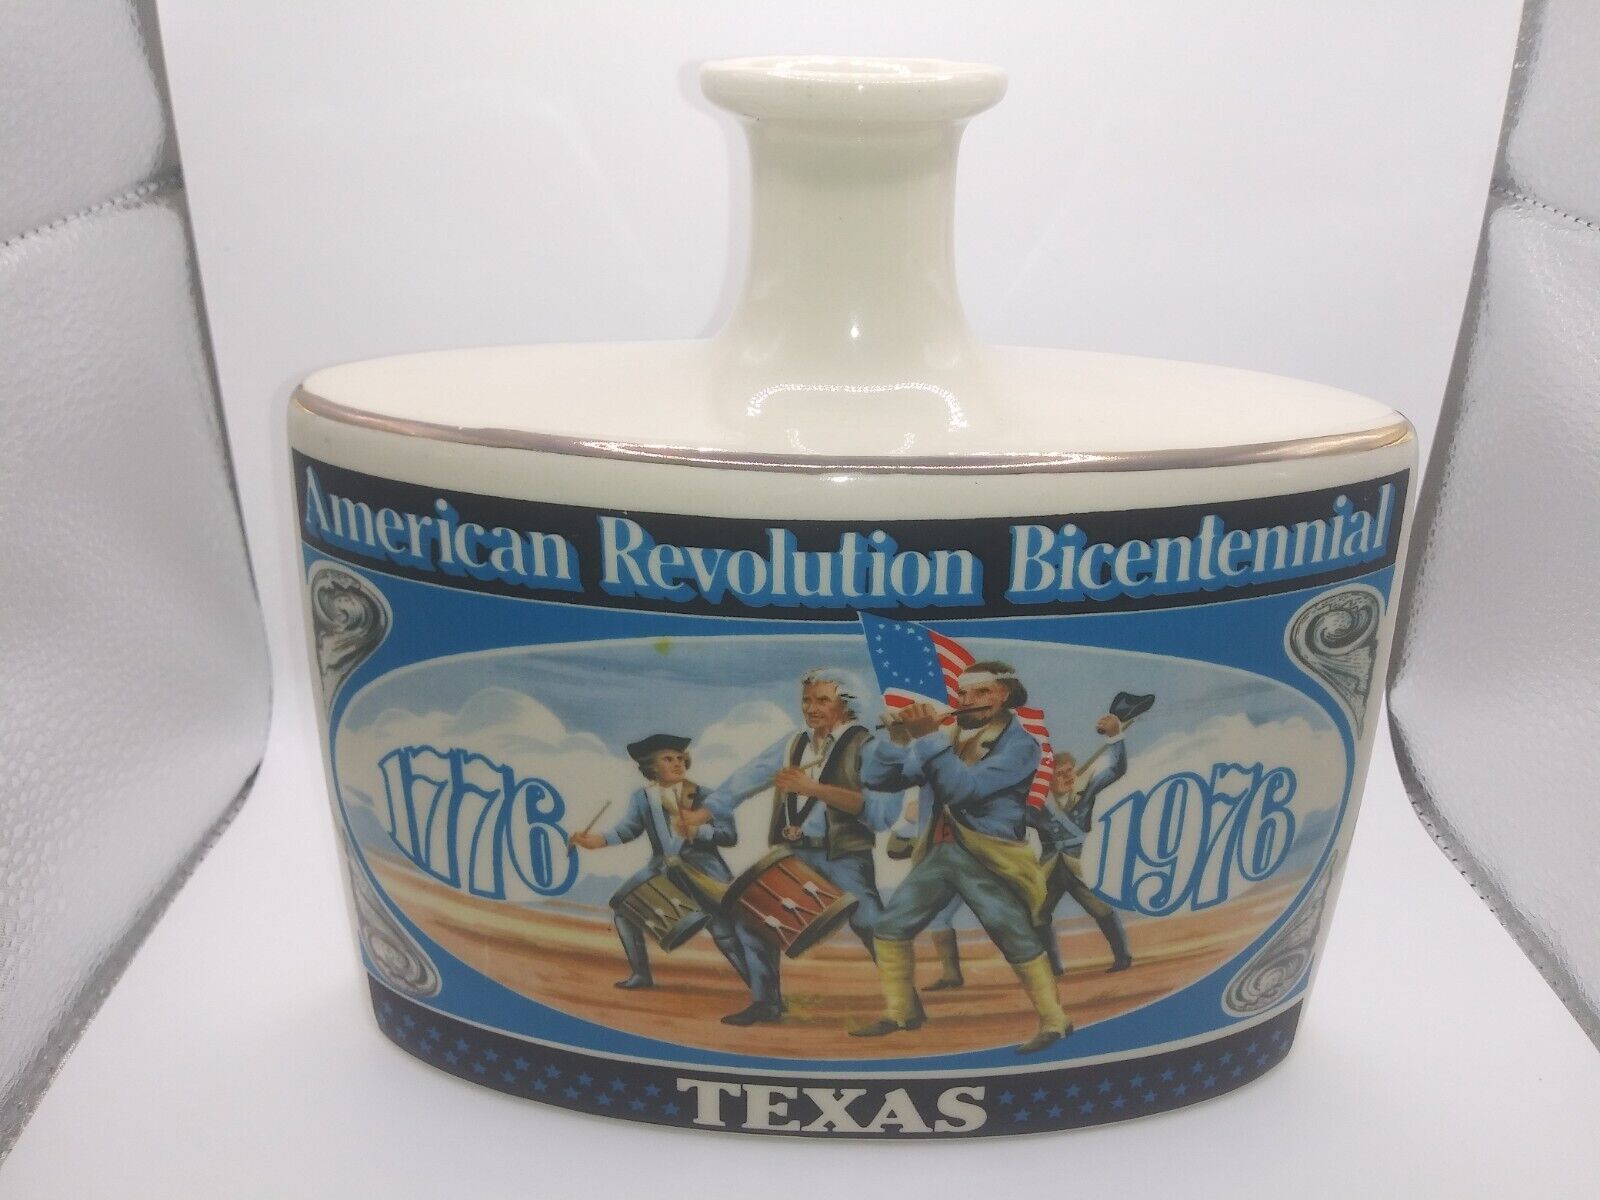 Vintage EMPTY Early Times Whiskey Bottle American Revolution Bicentennial Texas